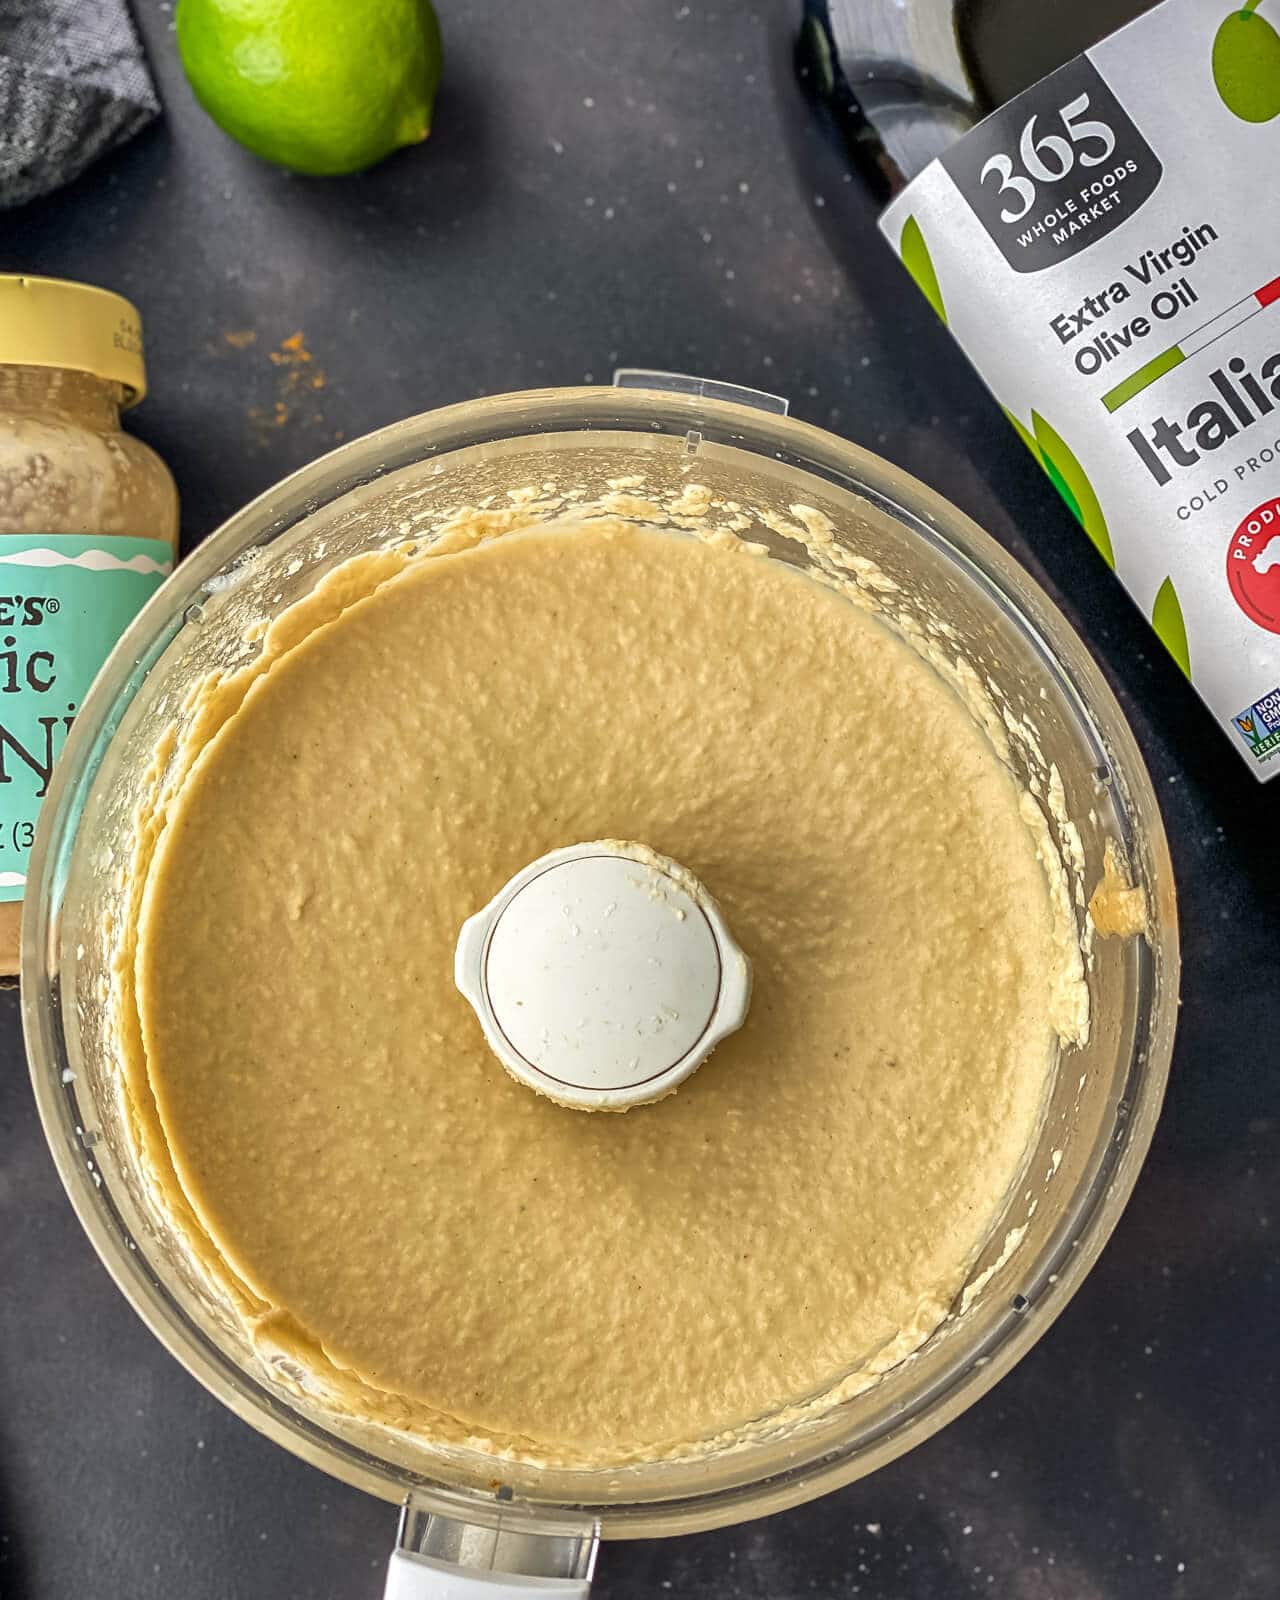 The base of a food processor with creamy blended hummus, a bottle of olive oil, a lime, and a jar of tahini around the hummus.